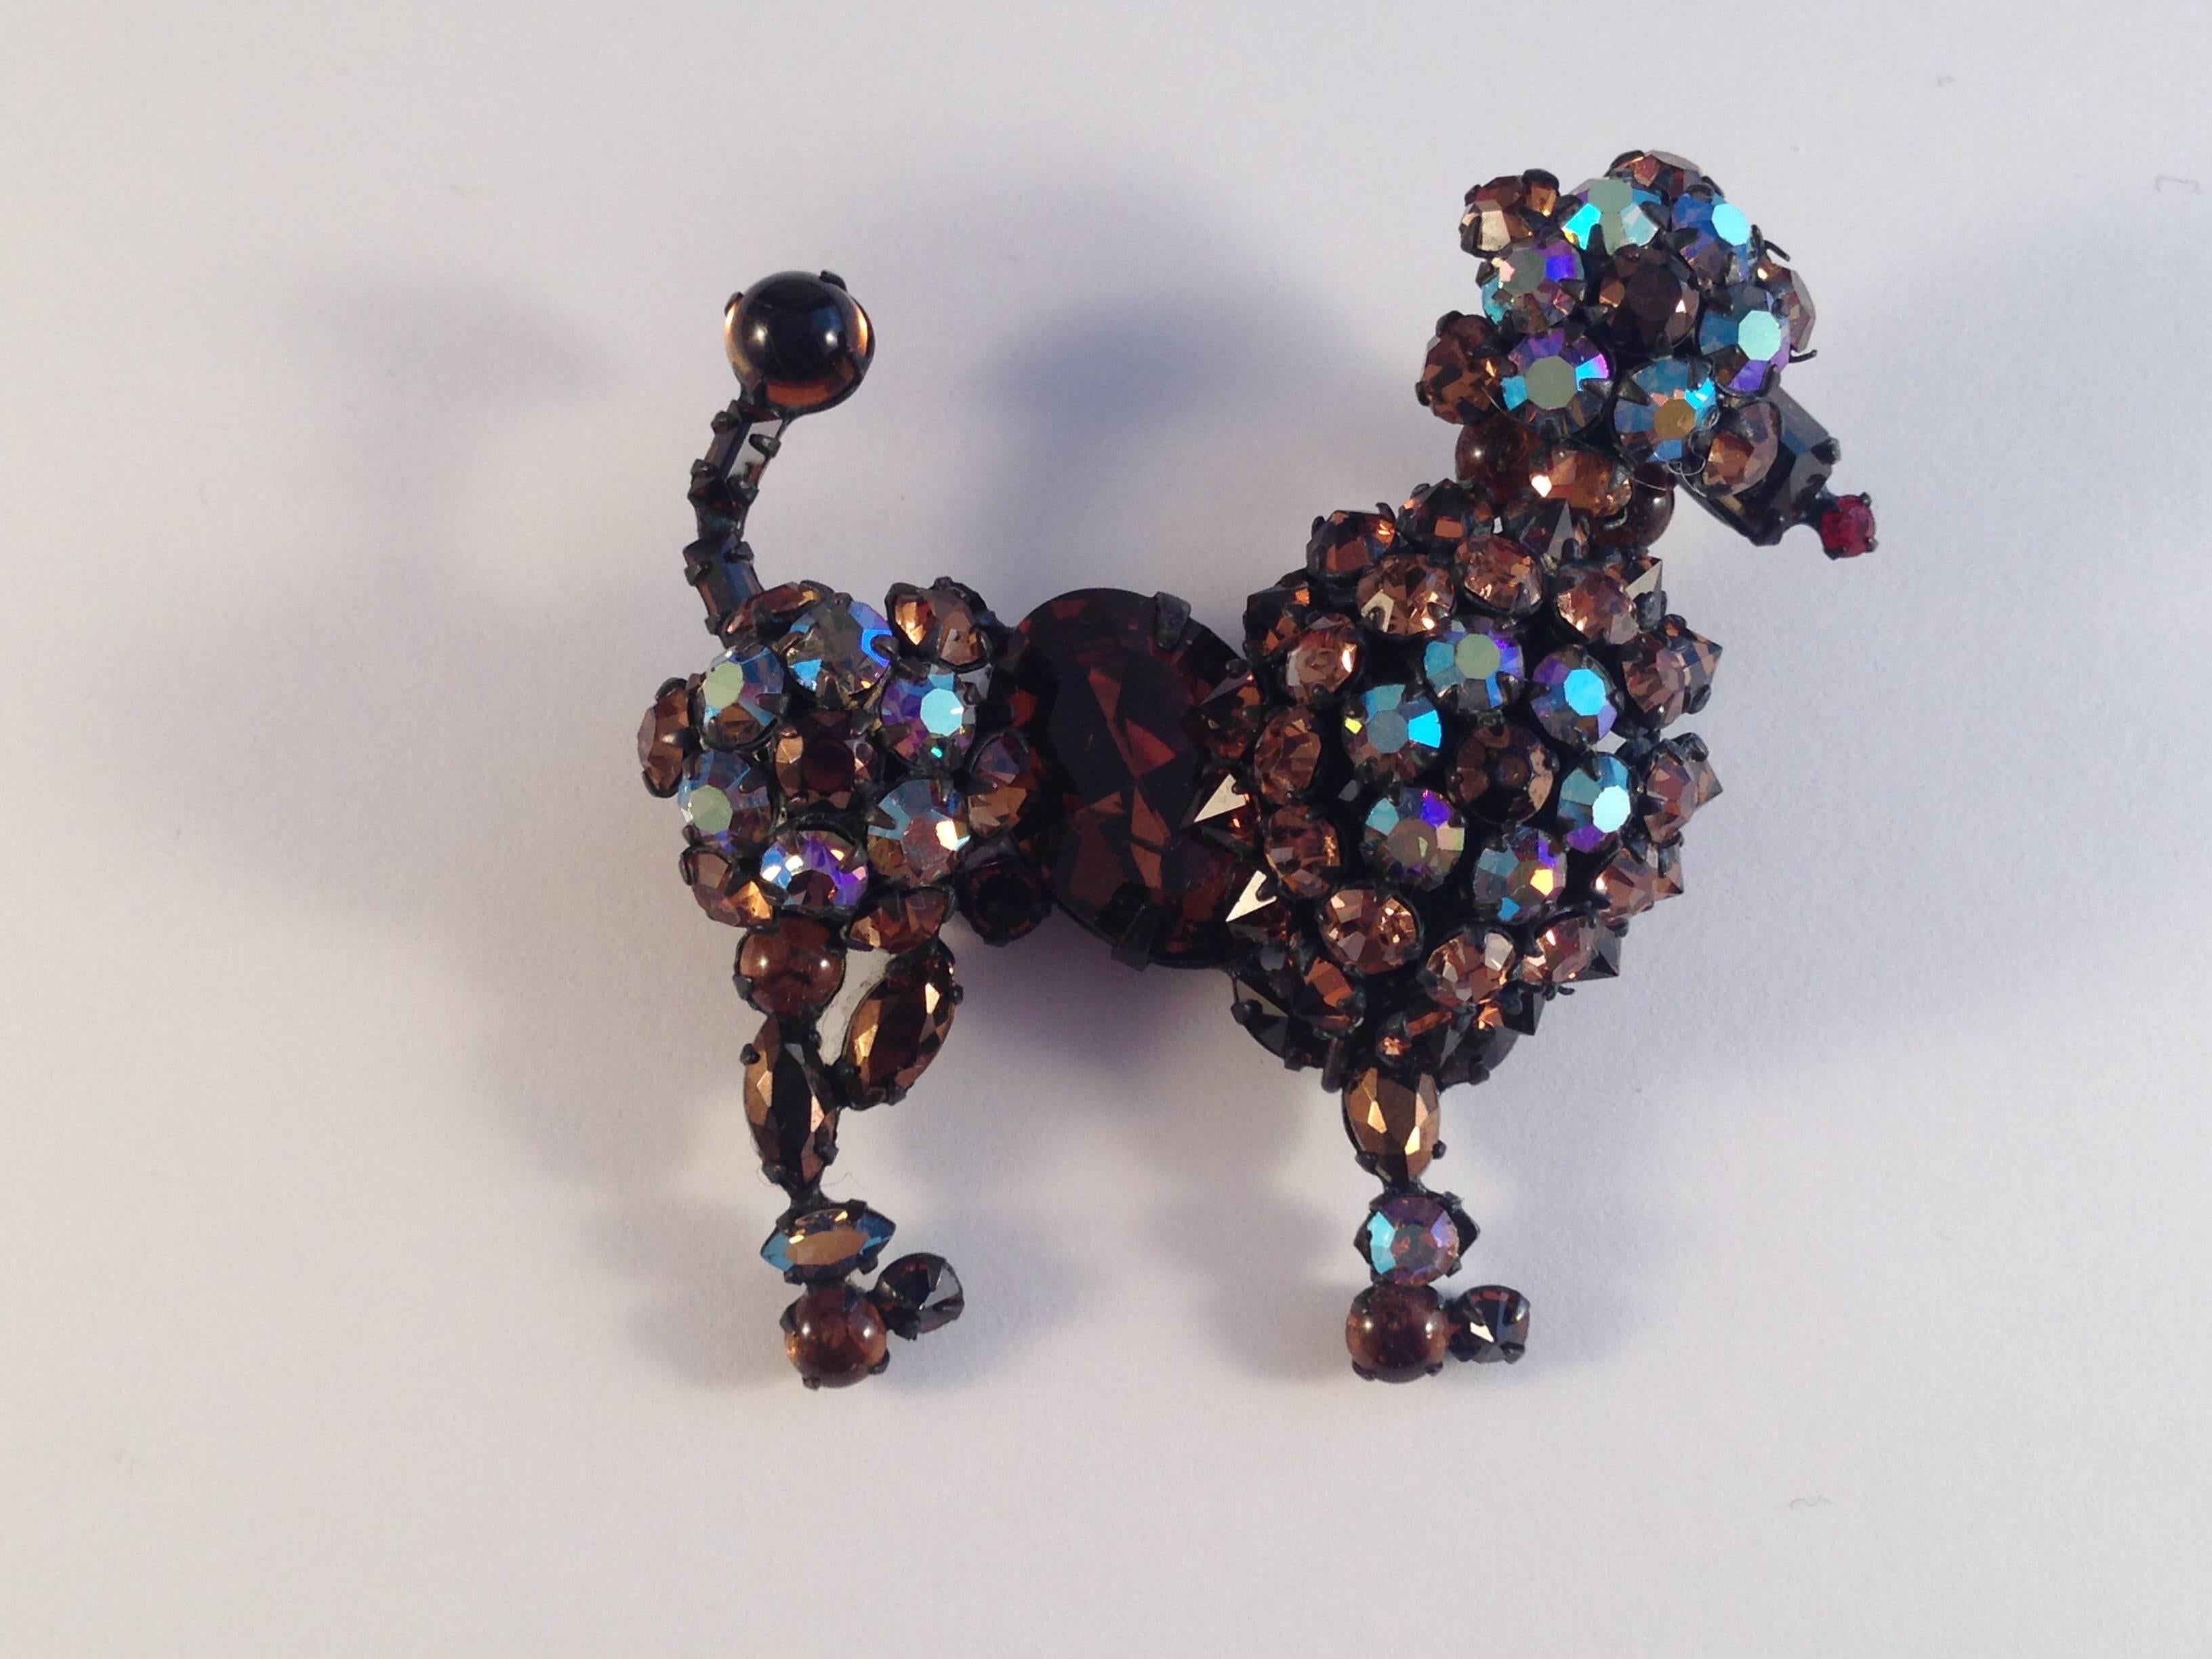 This is a 1950s unmarked Schreiner poodle brooch made of jappaned metal and set with regular brown glass and brown aurora borealis glass stones. Many of the stones are set point side up - a Schreiner signature. It is in excellent condition.

Harry